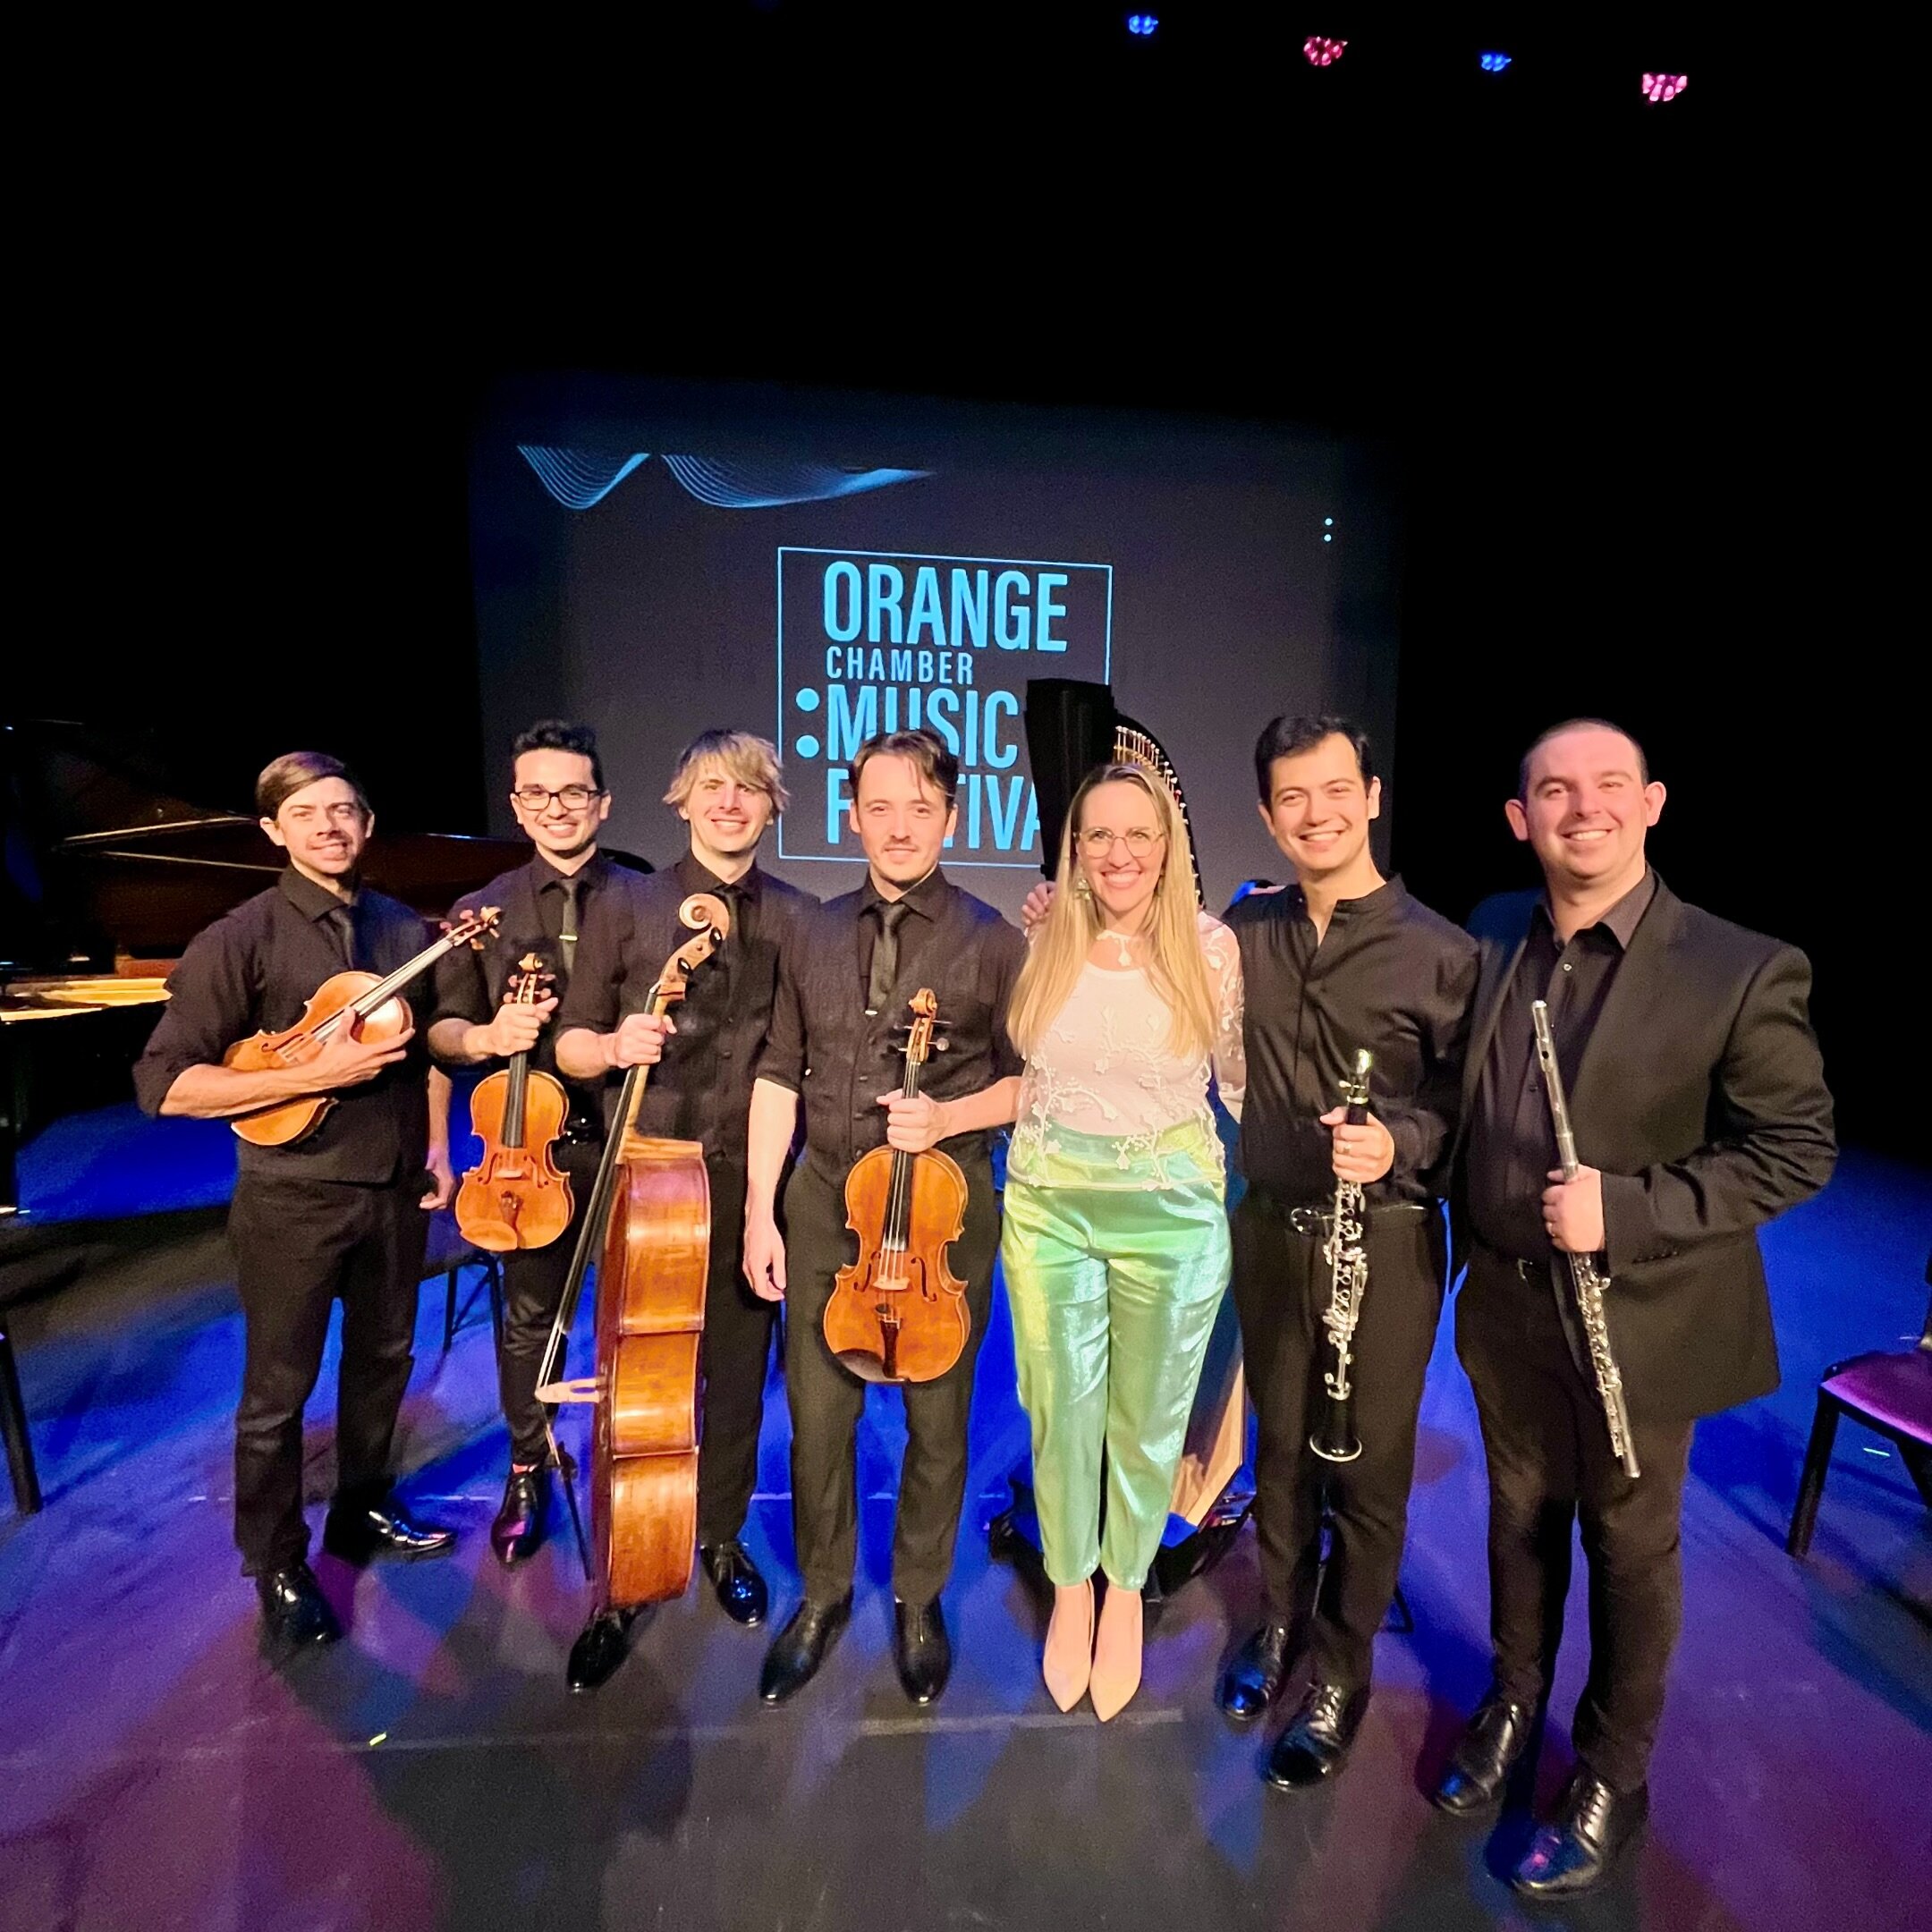 My 4th year performing at the @orangechambermusic , and the best one yet! It&rsquo;s such an exciting festival and I&rsquo;ve gotten to collaborate with so many spectacular musicians. Last night I had so much fun performing Ravel&rsquo;s Introduction